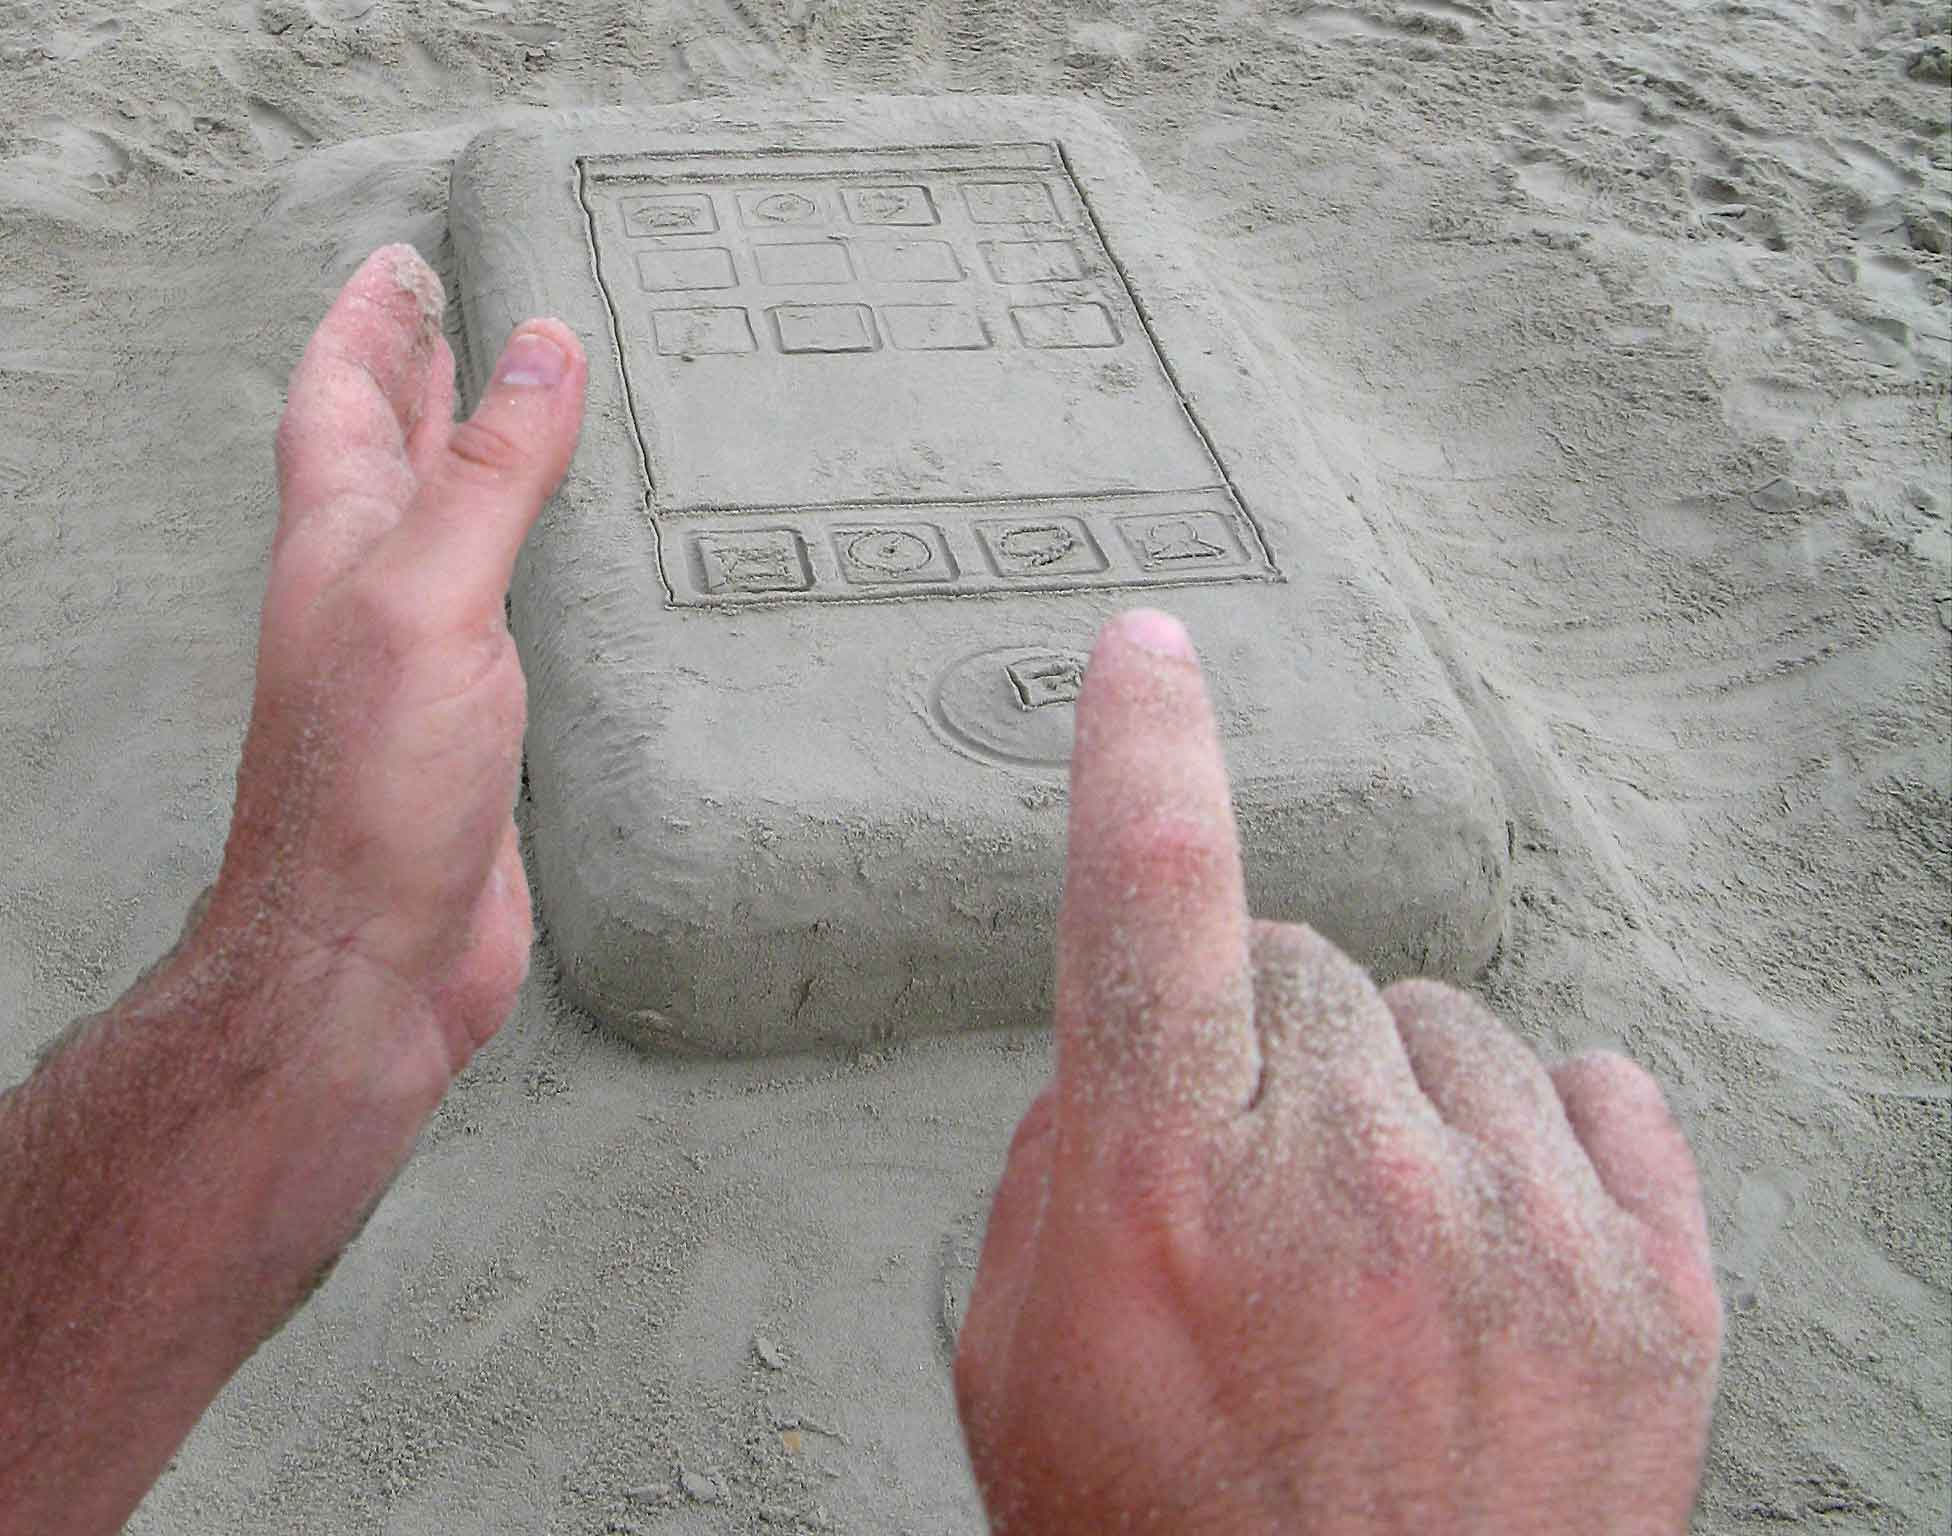 This Incredible iPhone Sandcastle Will Amaze You